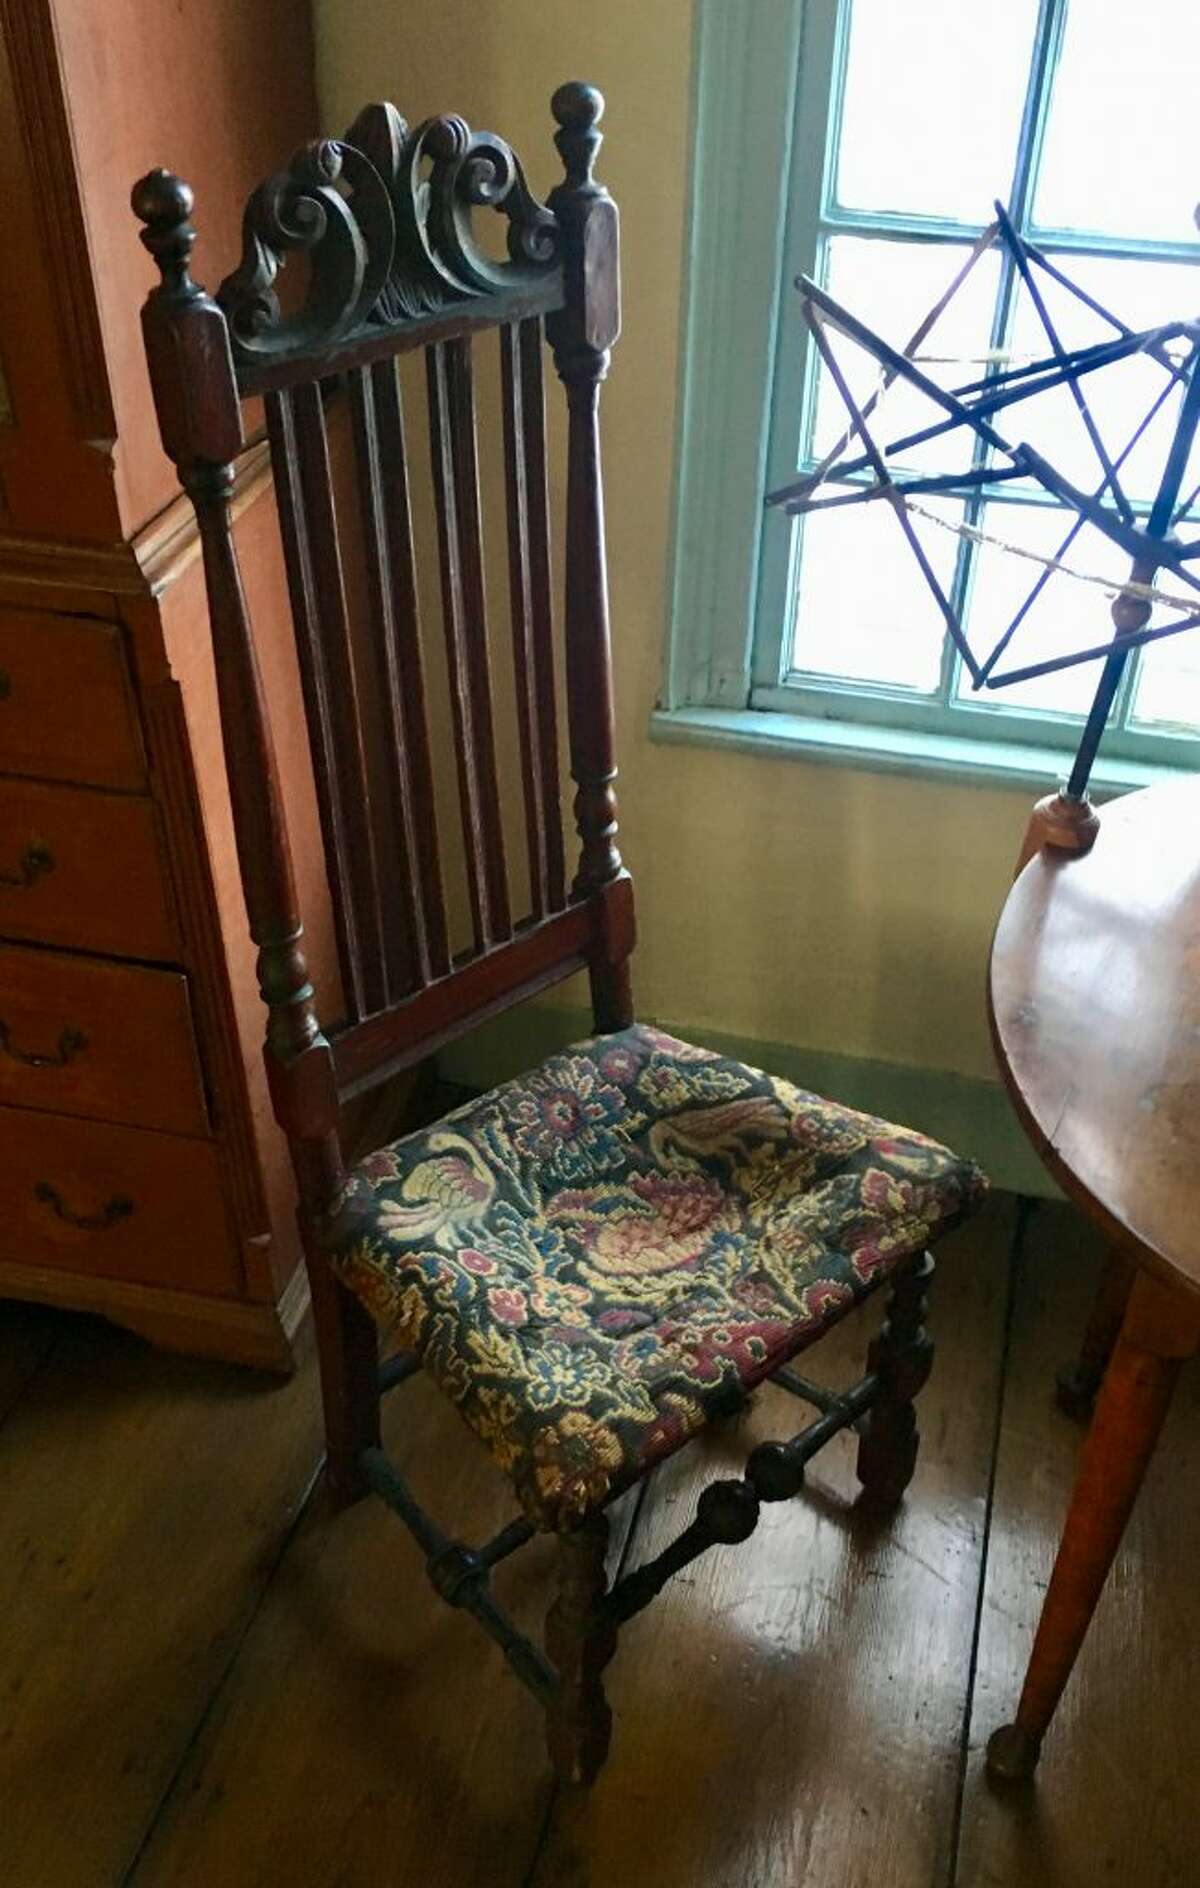 Keeler Tavern Museum and History Center is seeking funds to restore this rare painted banister back side chair dating back to the early 1700s through Fairfield County’s Giving Day Thursday, Feb. 28. The goal is to raise $3,000 within 24 hours. For more information, visit keelertavernmuseum.org.